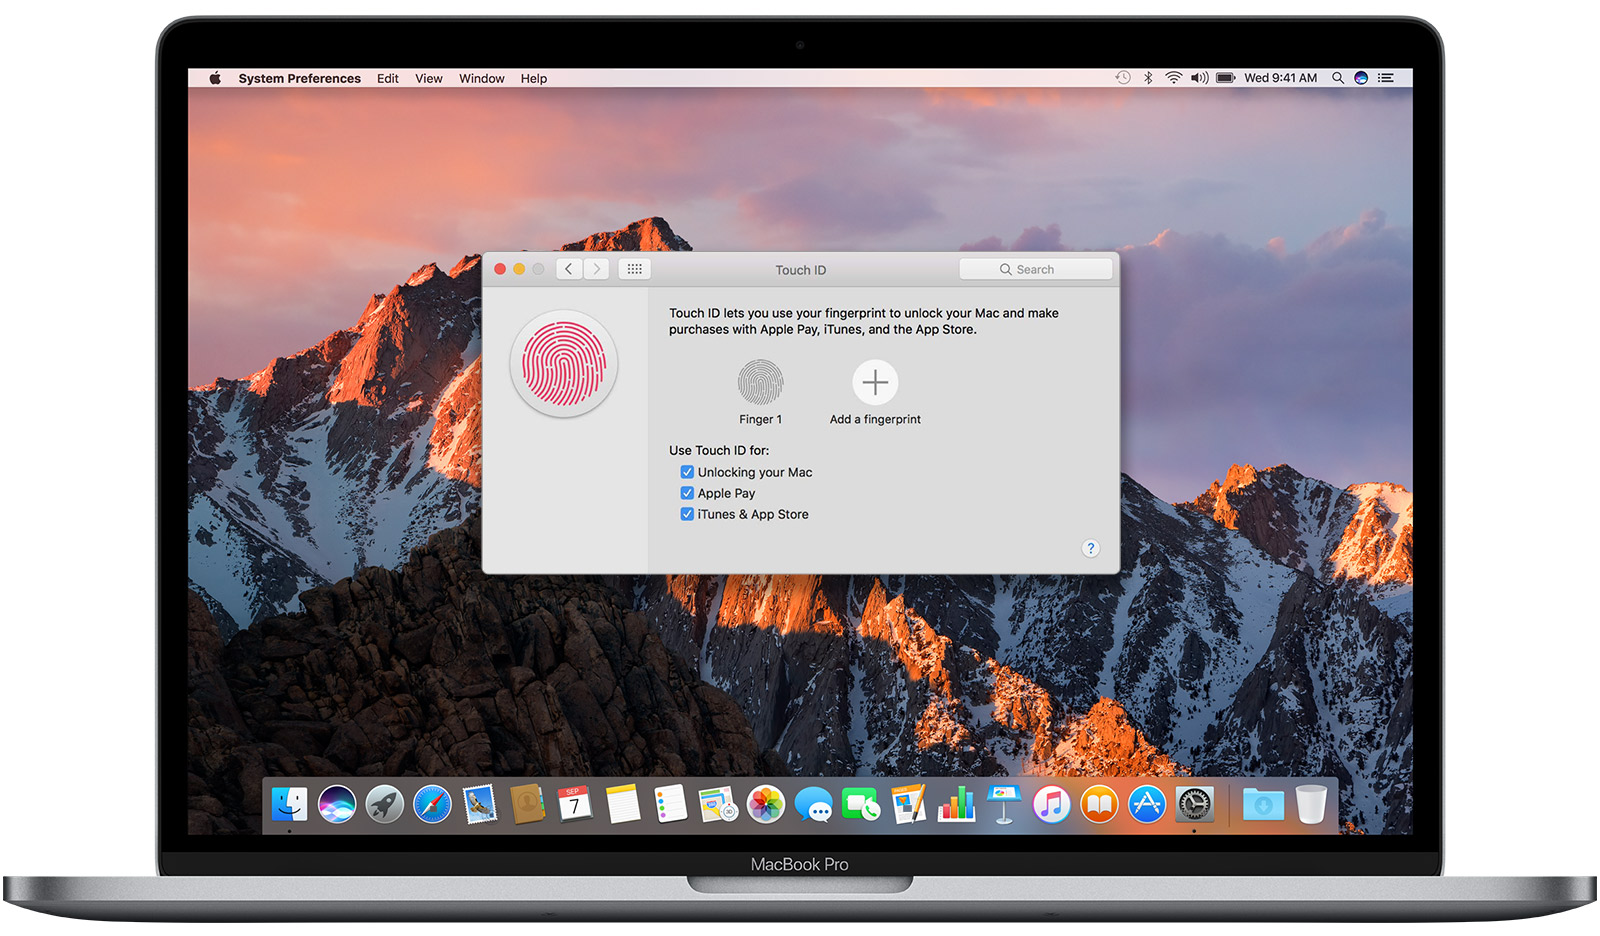 macos-sierra-system-preferences-touch-id-mac-screenshot-001